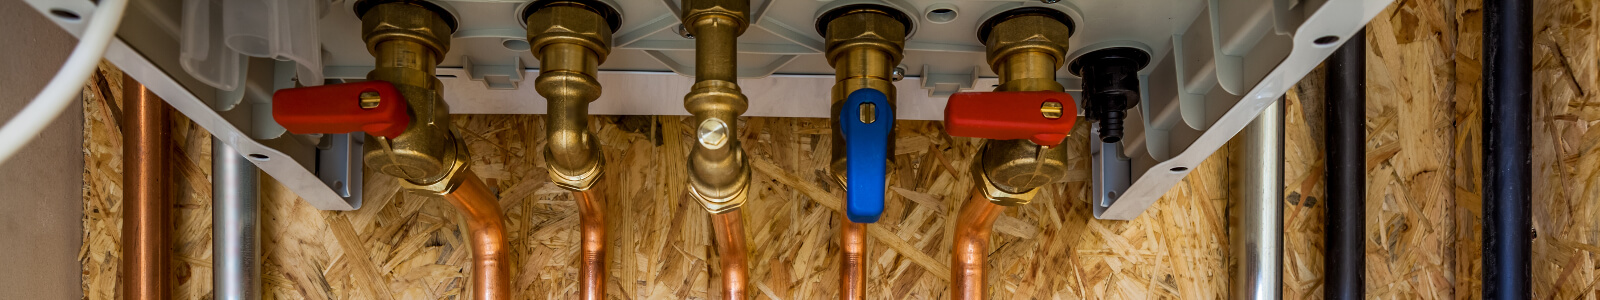 Plumbing Valve Repair and Replacement Services